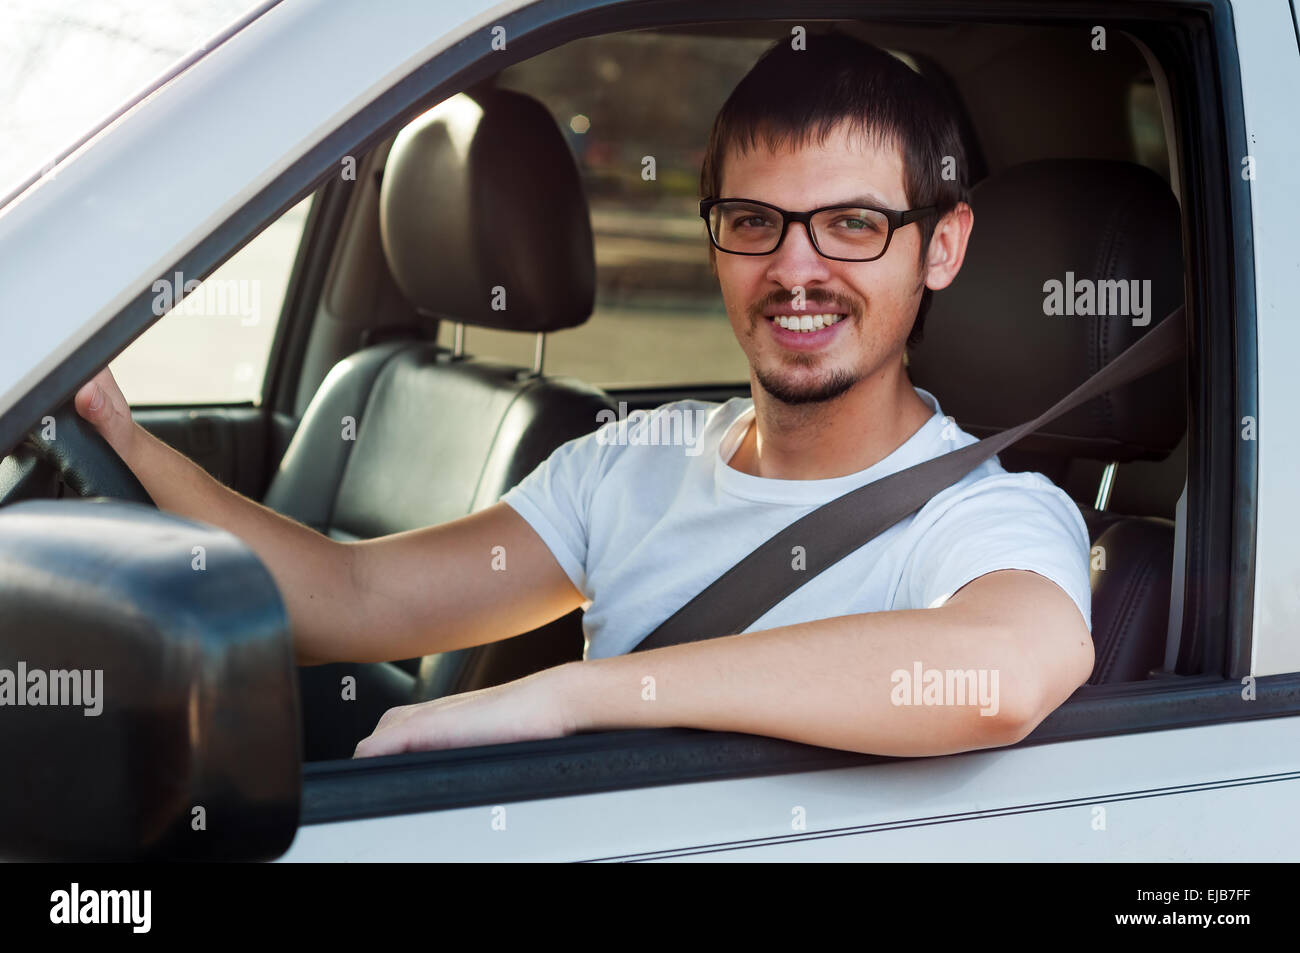 Male caucasian good driver is smiling in his car Stock Photo